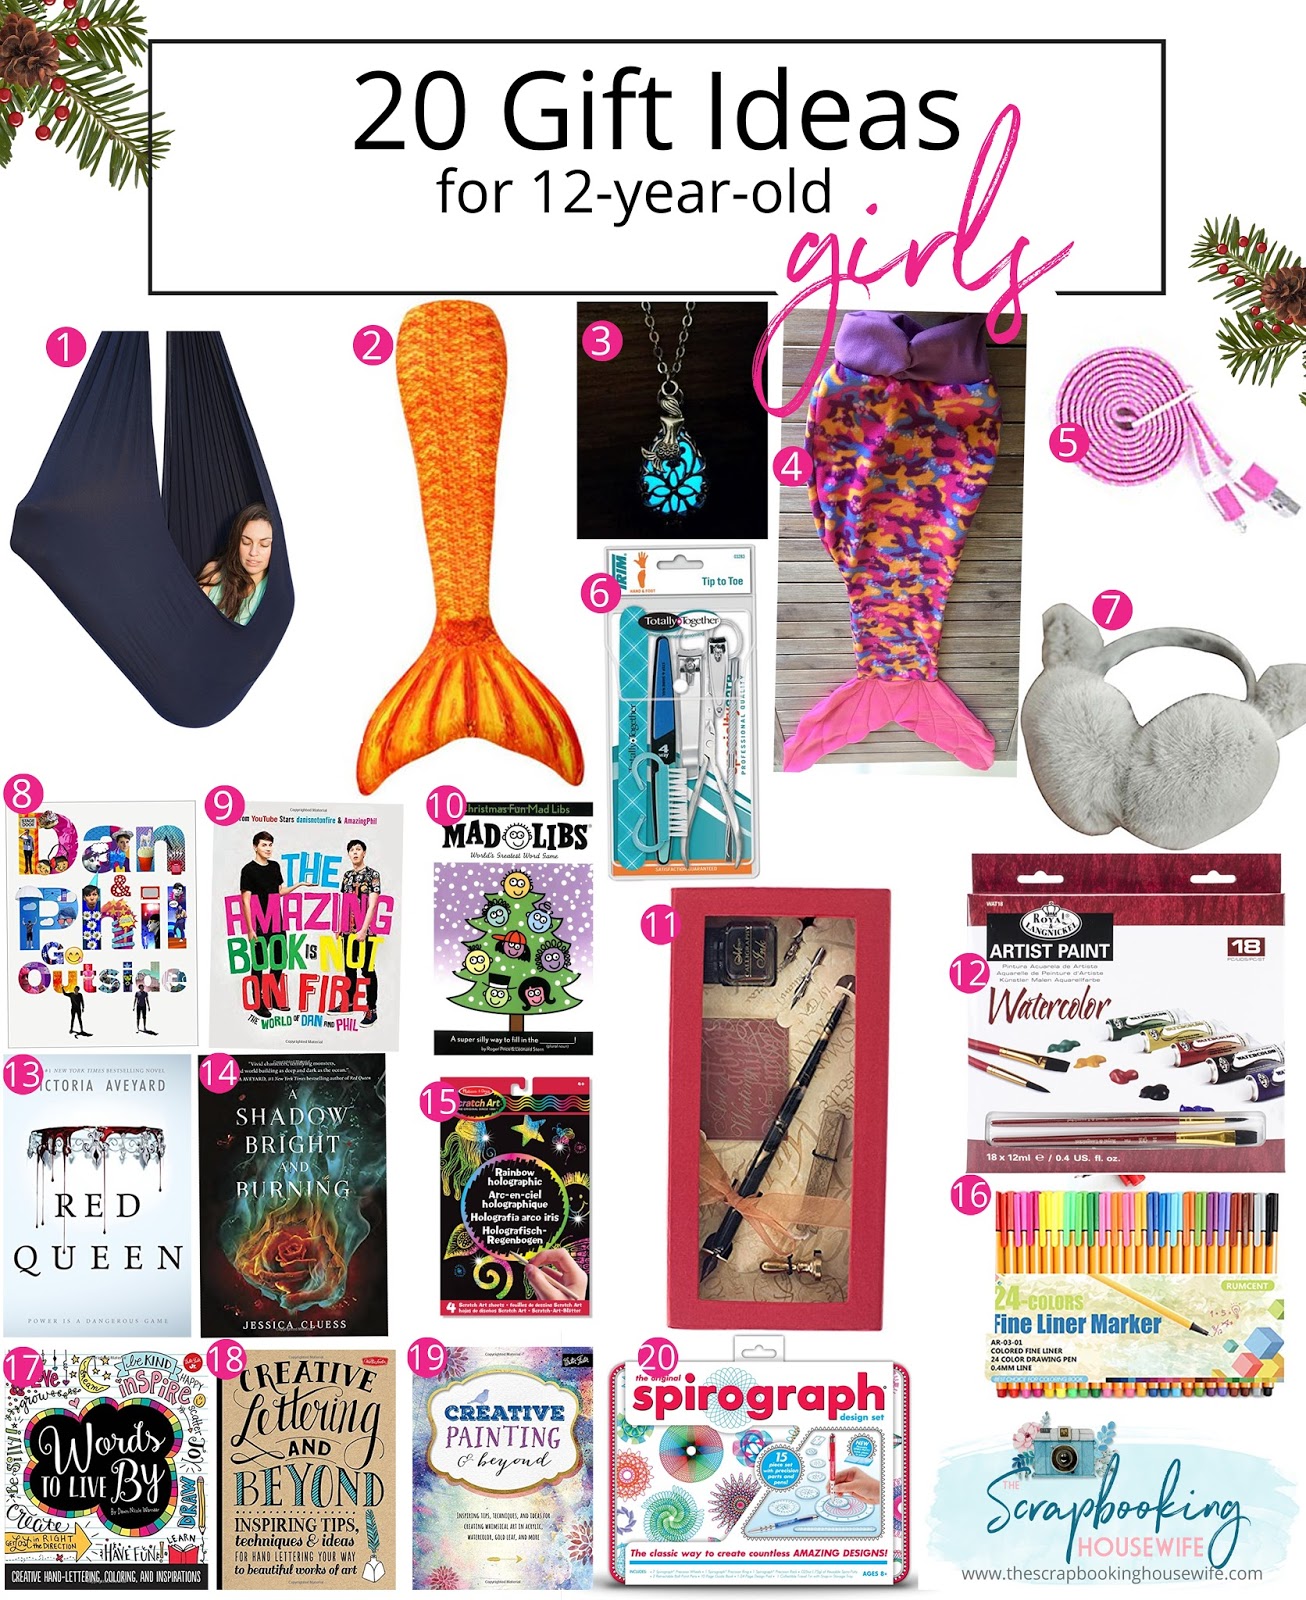 xmas gift ideas for 12 yr old girl